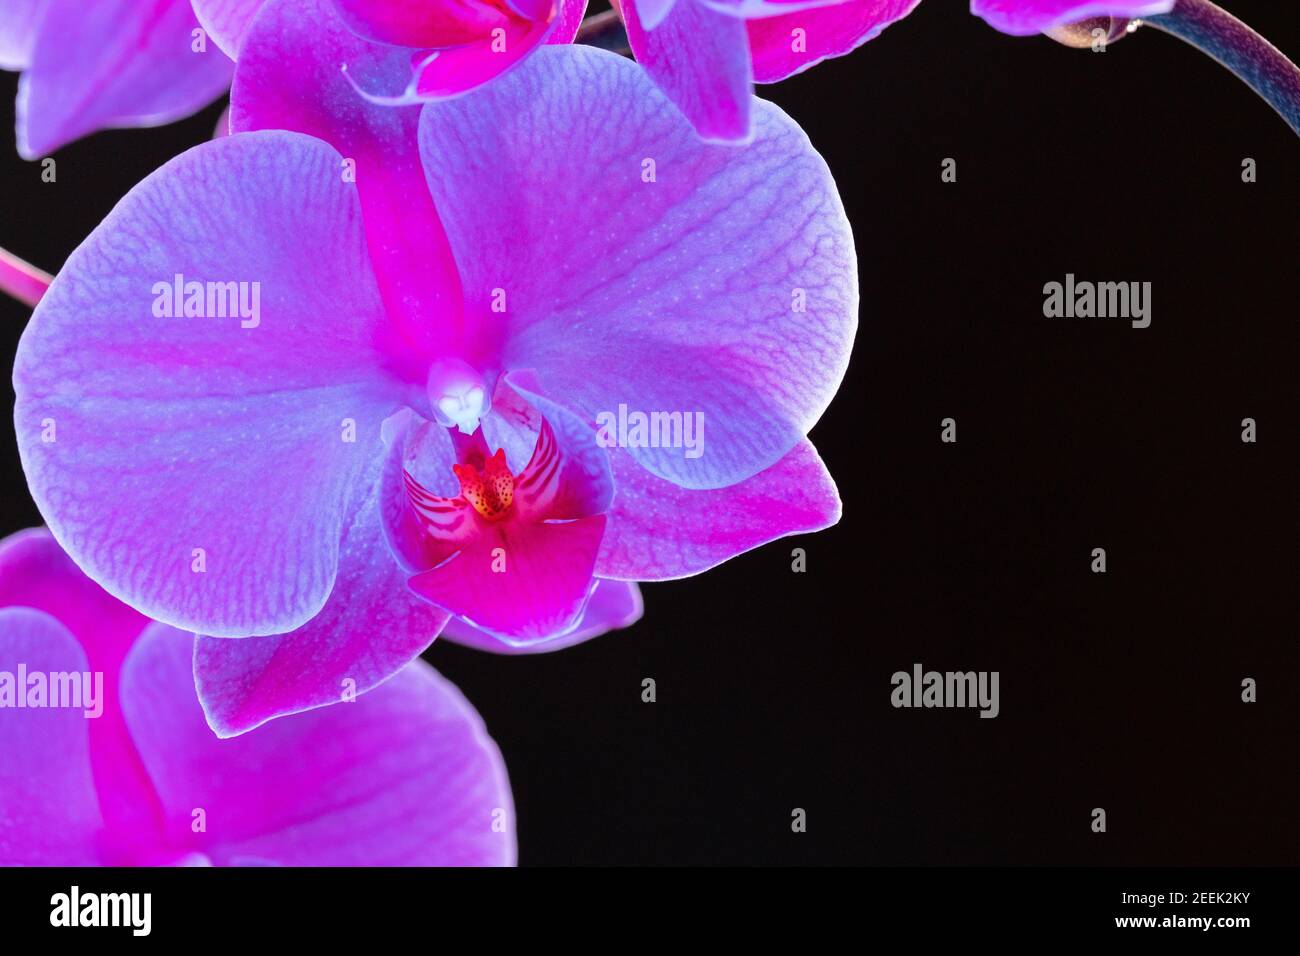 Branch Of Orchid Flowers On Dark Background In Neon Light Stock